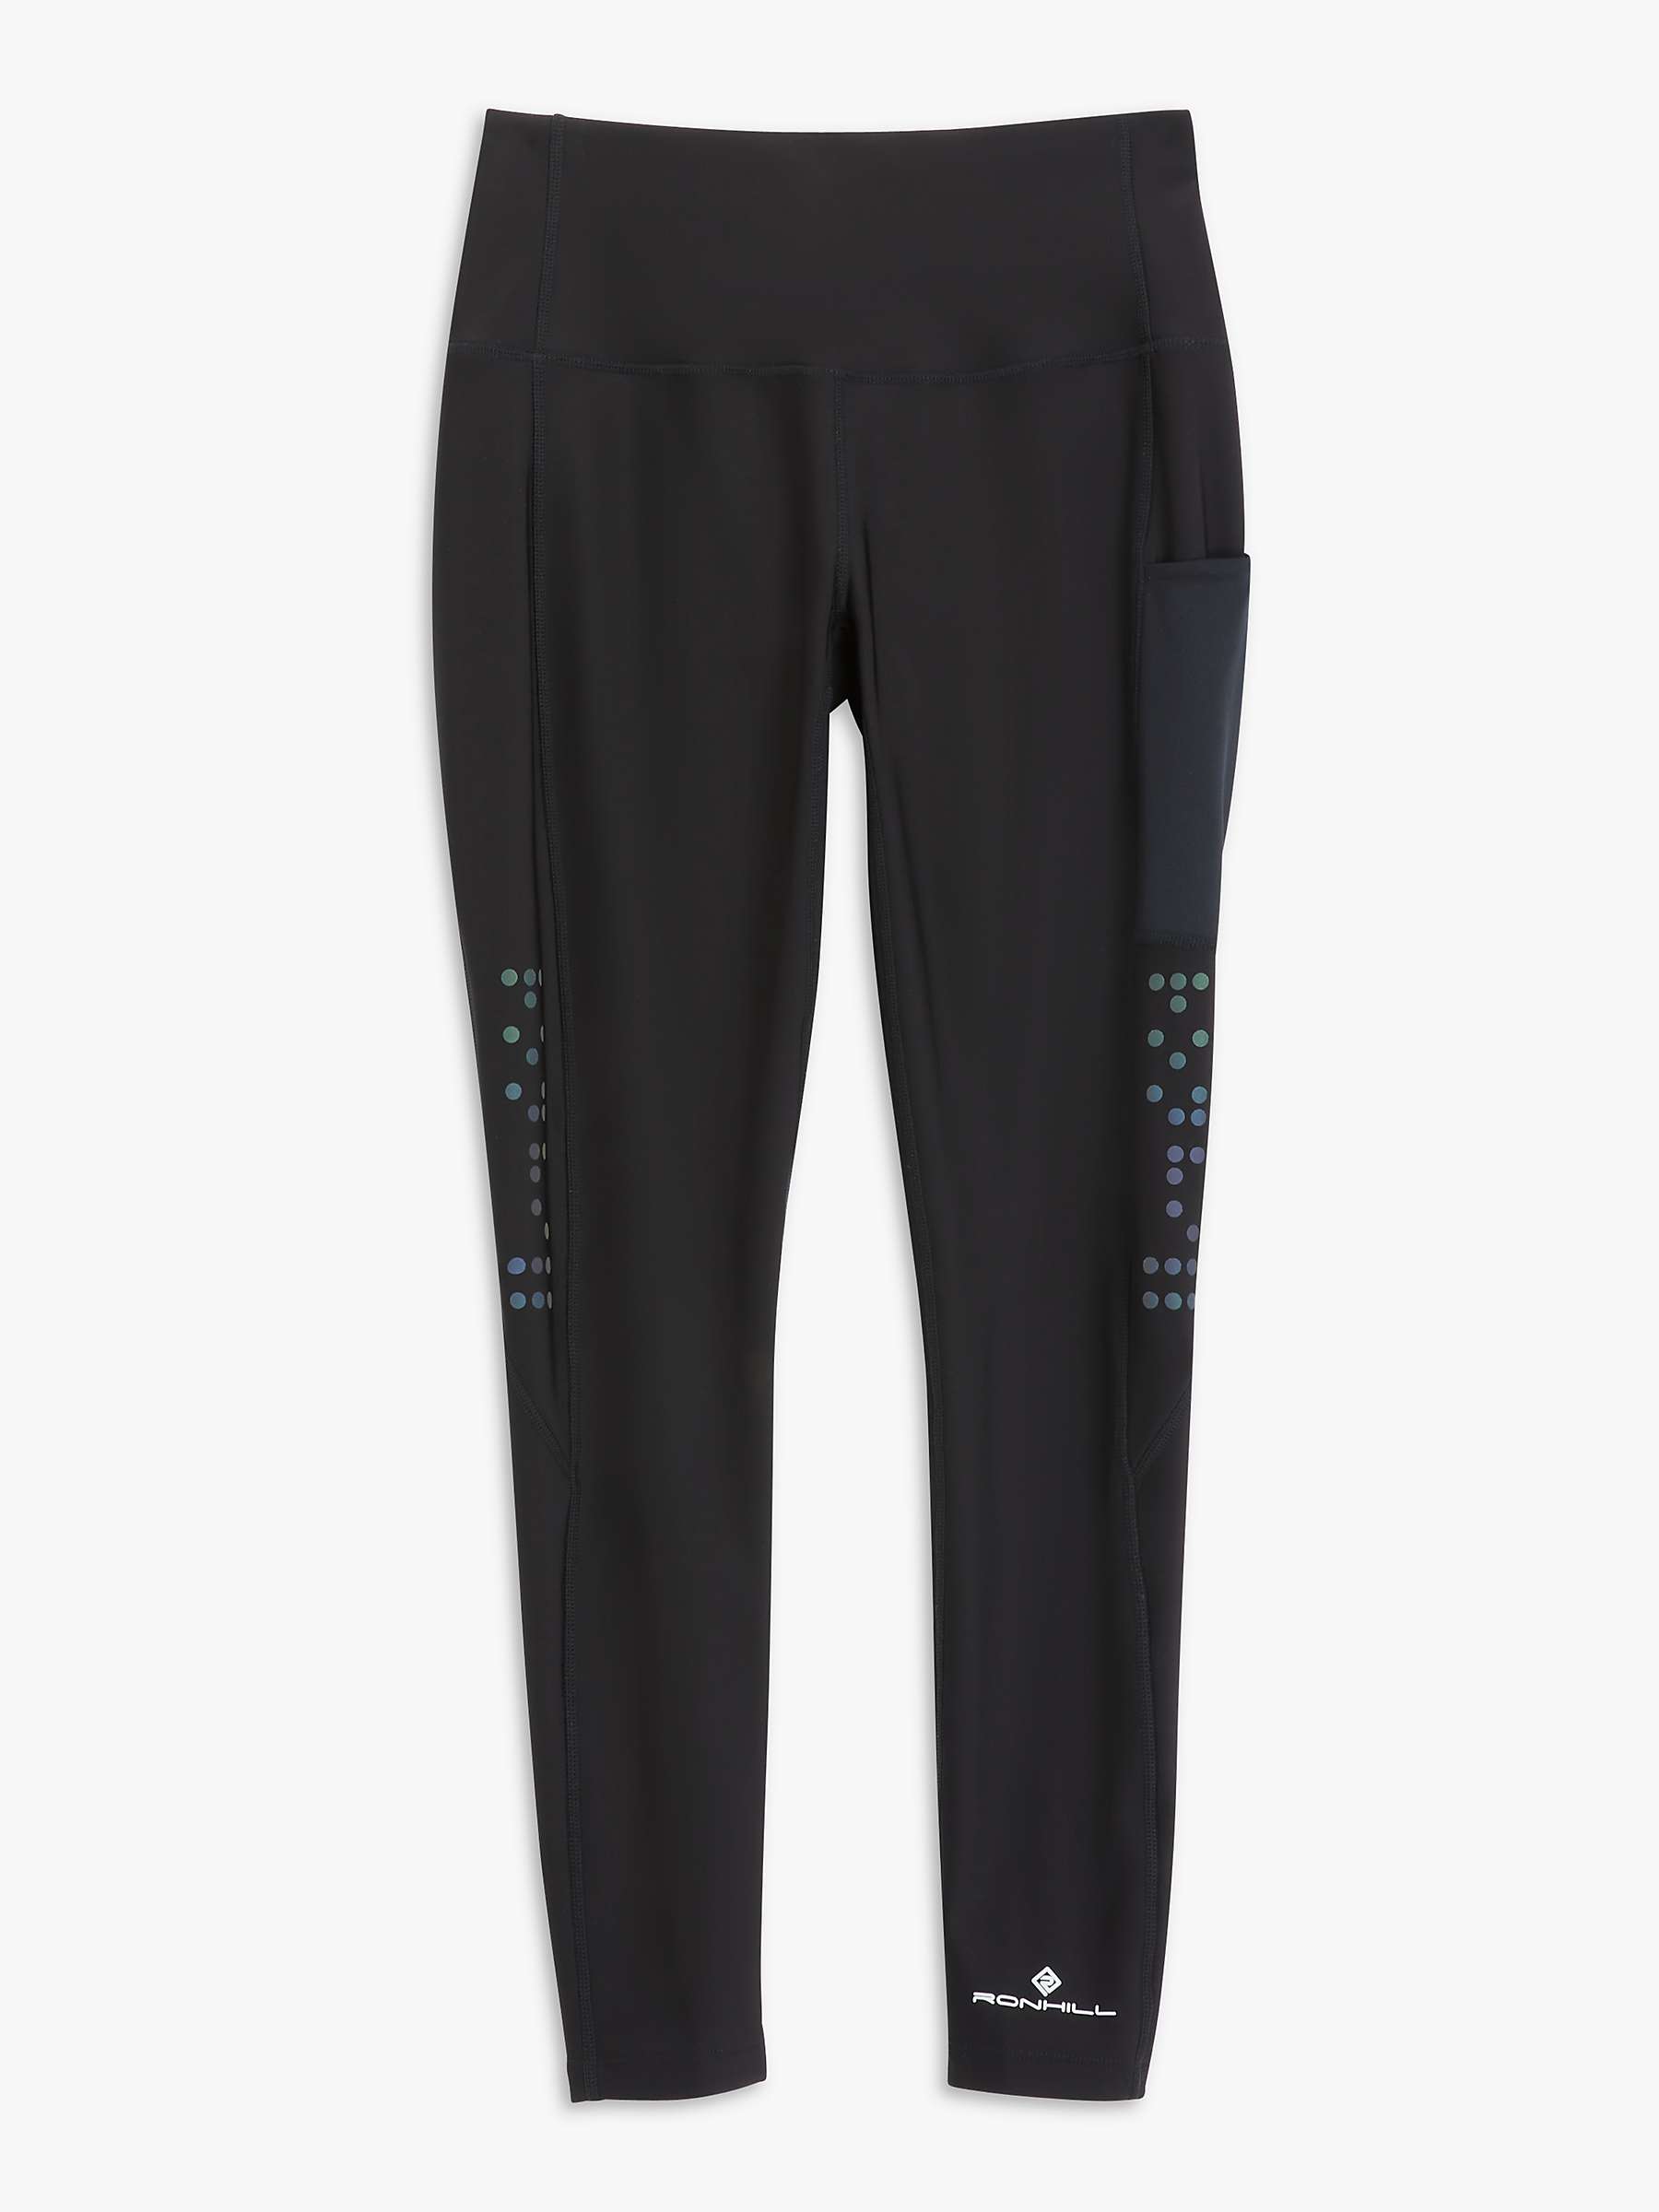 Buy Ronhill Tech Winter Running Tights Online at johnlewis.com